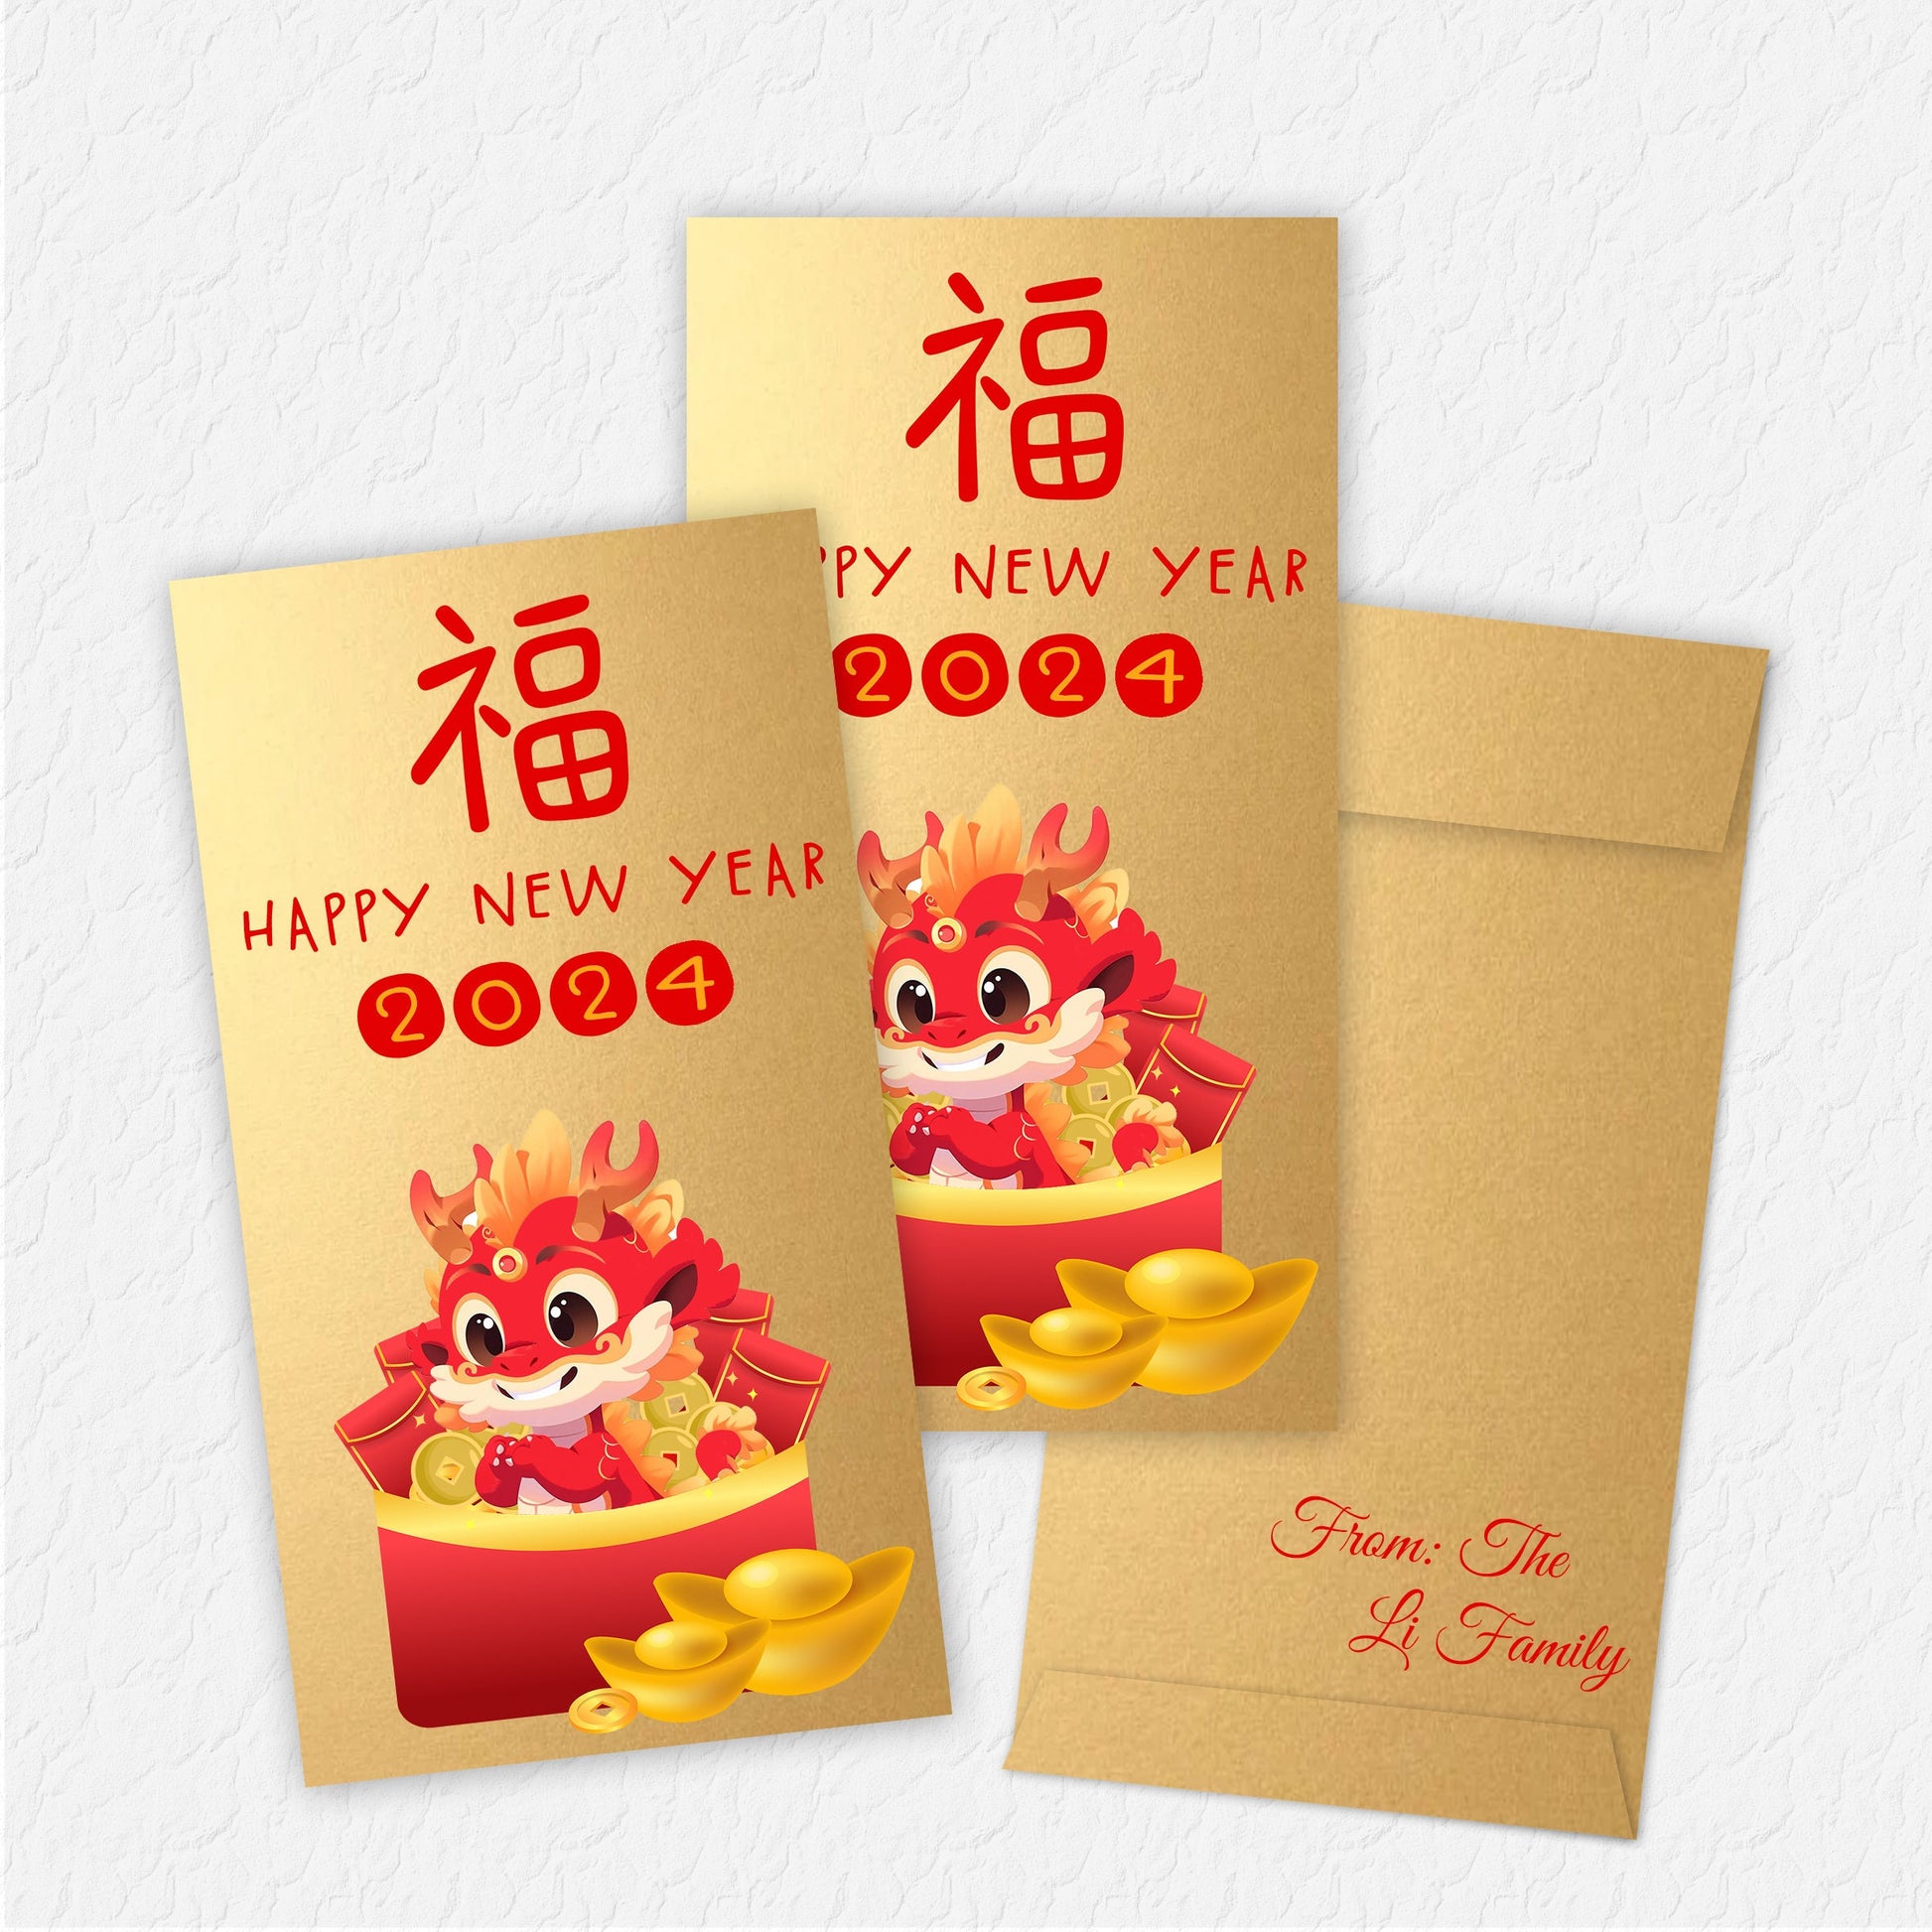 Year of the Dragon, Lunar New Year Envelope, Dragon Envelope, Year of the Dragon Envelope, Chinese New Year, Money Envelope, Lucky Envelope